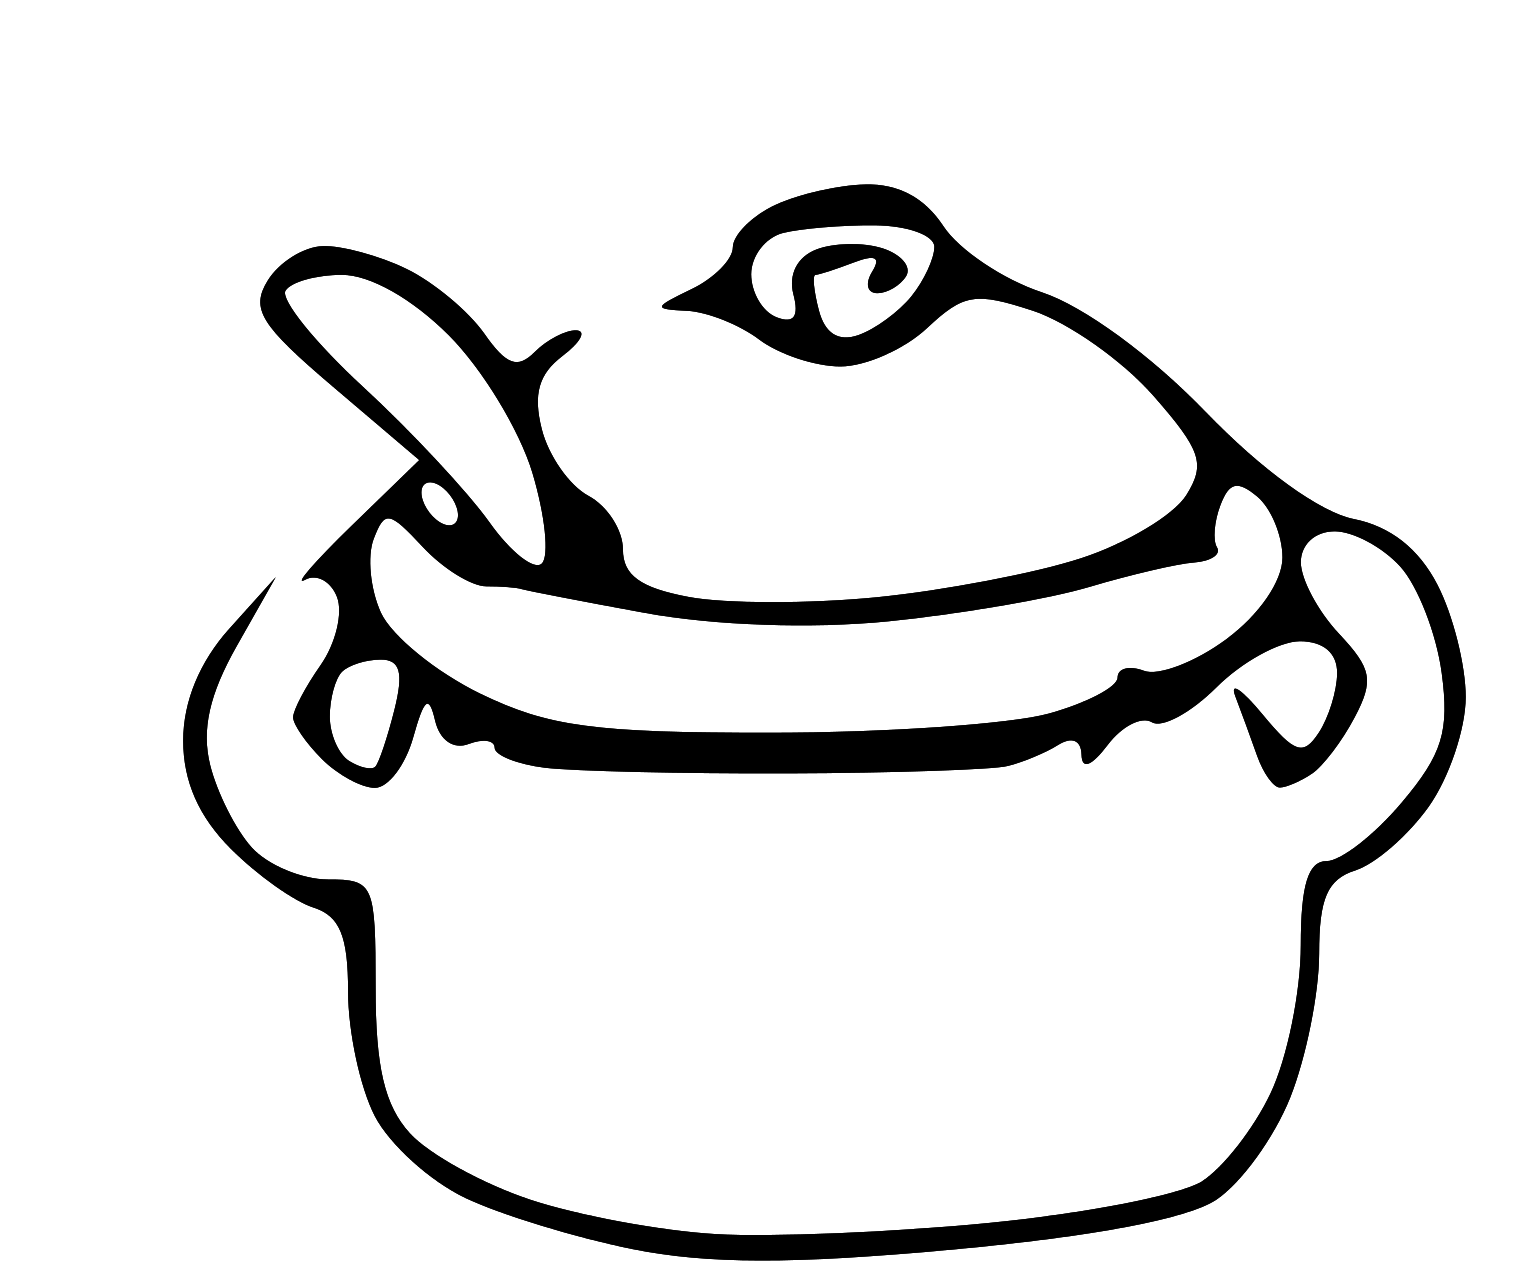 Cooking Pot Doodle Style Sketch Illustration Stock Vector (Royalty Free)  379428172 | Shutterstock